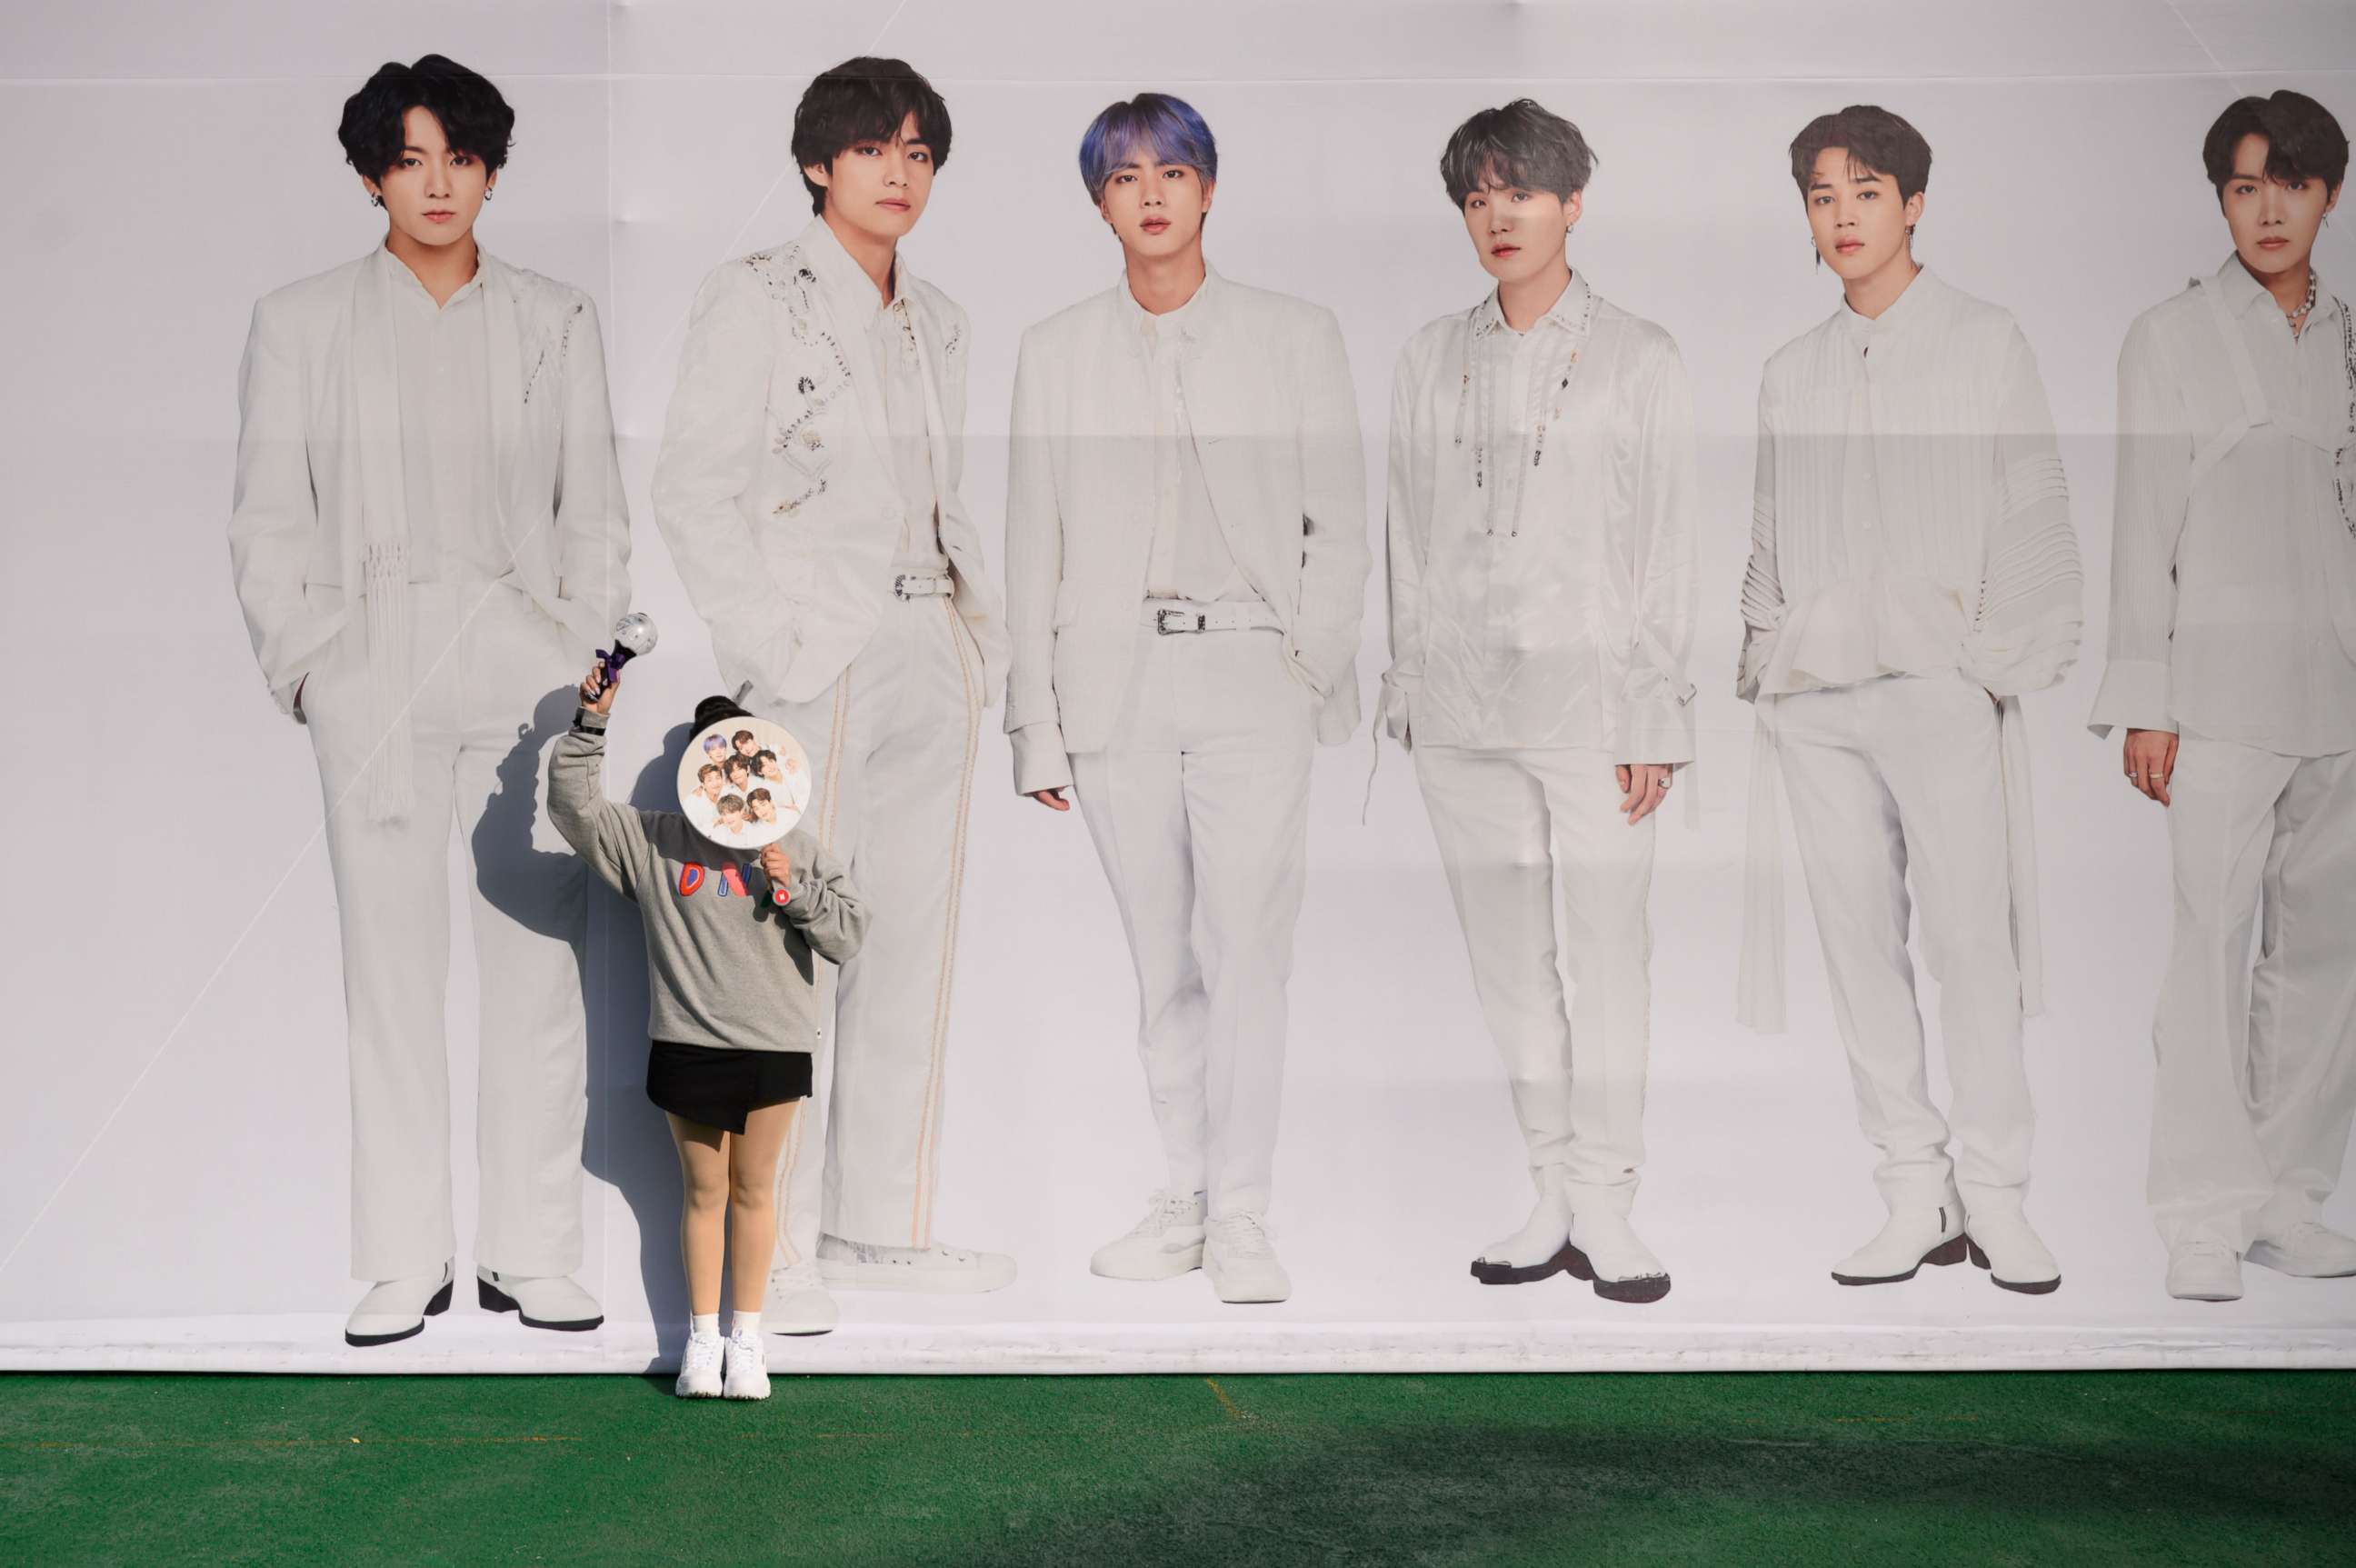 PHOTO: In a photo taken on October 29, 2019, a fan of BTS poses against a backdrop featuring an image of the band members, as they arrive for the final concert of their world tour at the Olympic stadium in Seoul. (Photo by ED JONES/AFP via Getty Images)